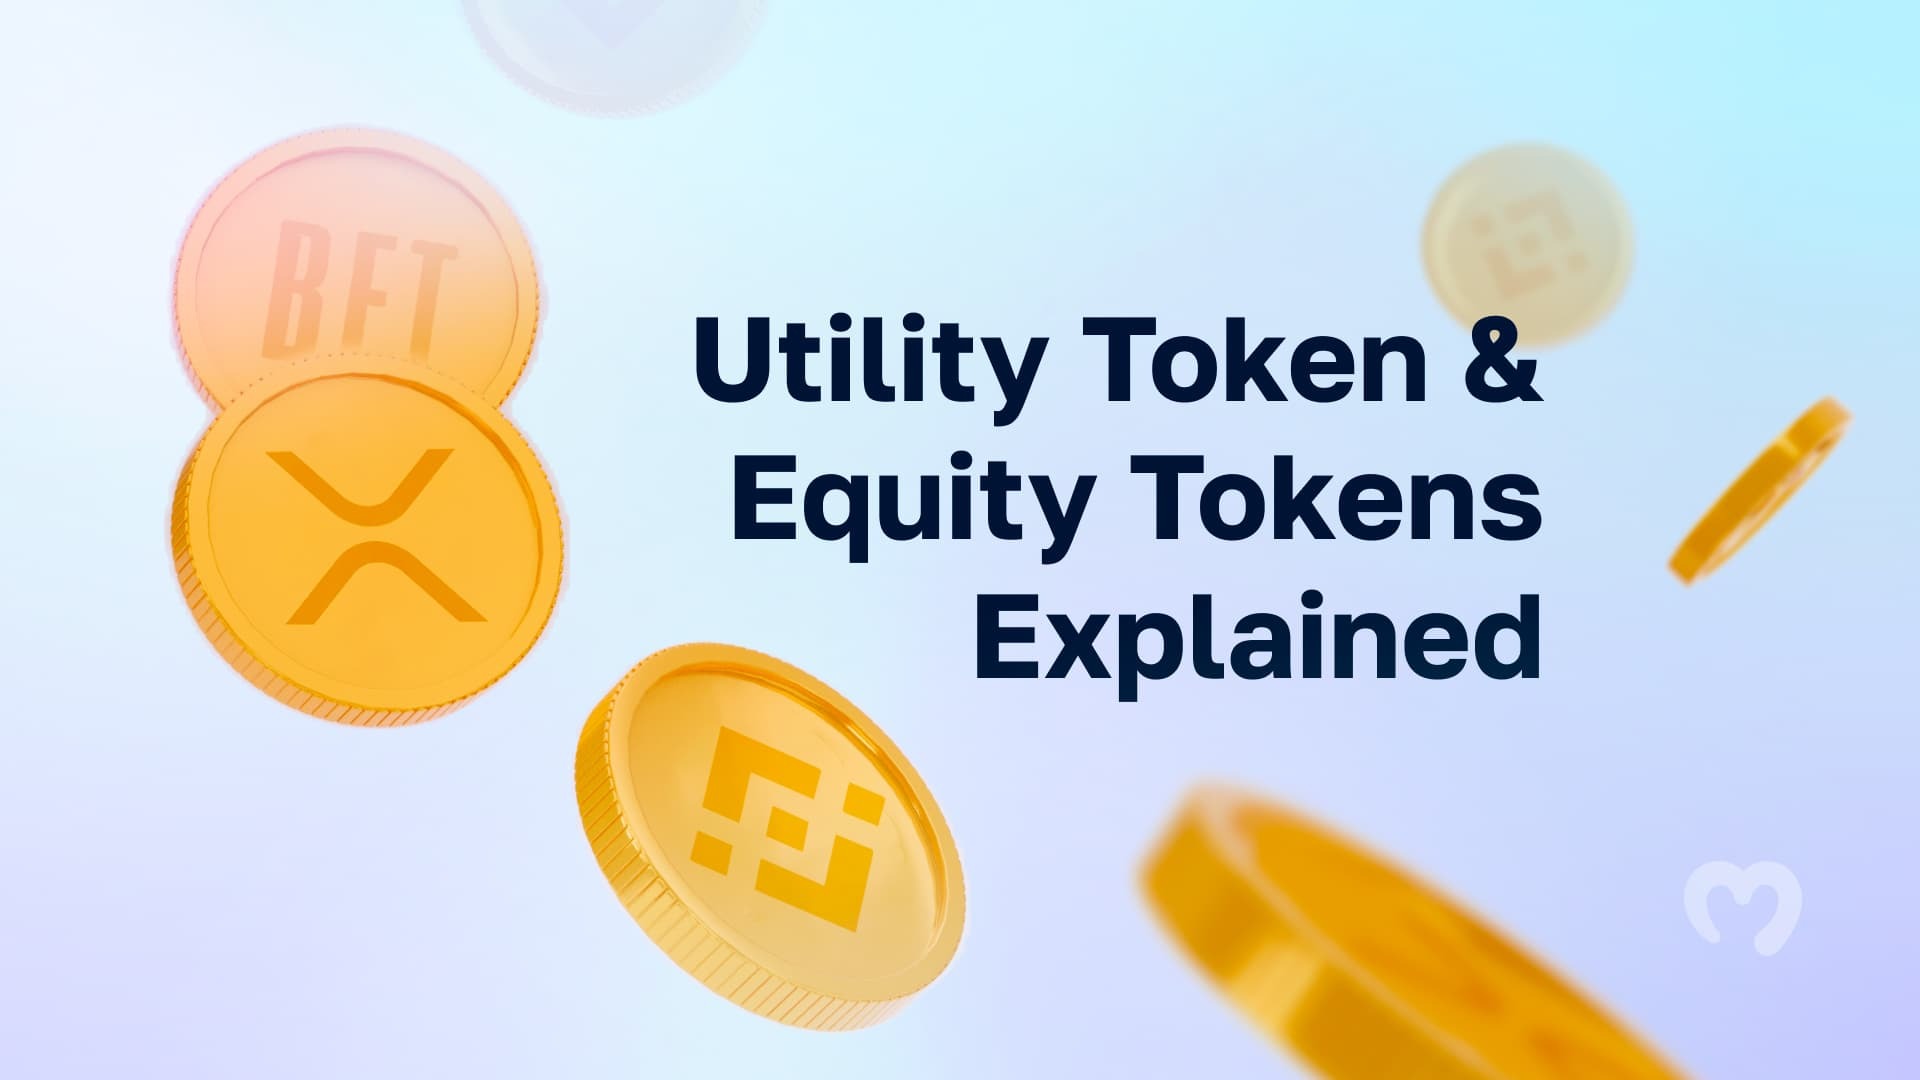 What Are Utility & Equity Tokens? | Moralis Academy